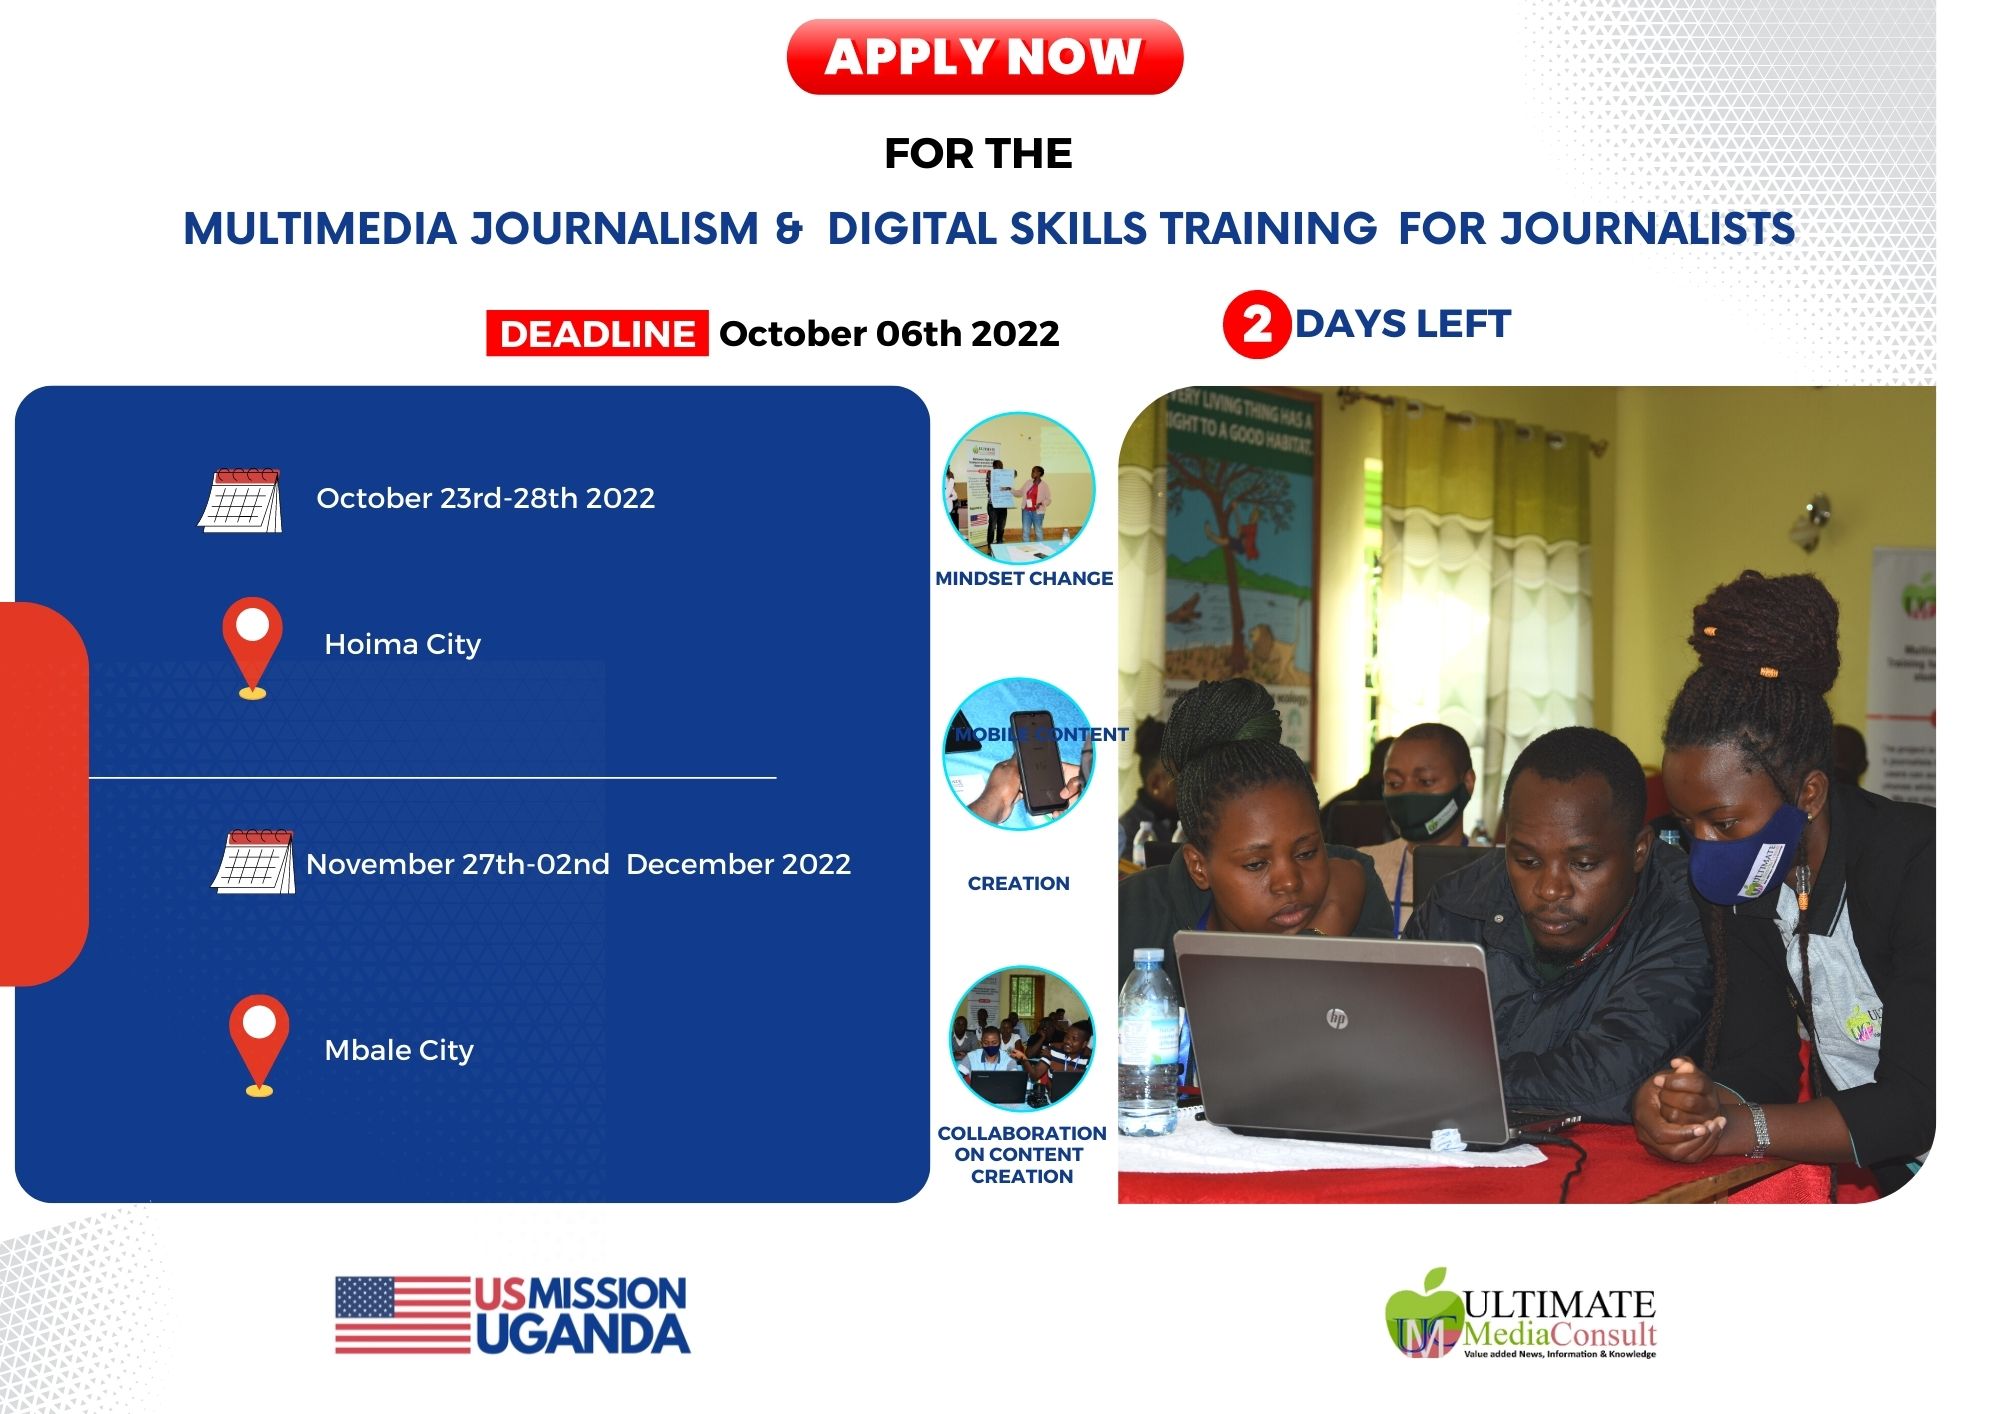 Applications Invited For Journalists To Be Trained In Multimedia Journalism and Digital Skills. 4